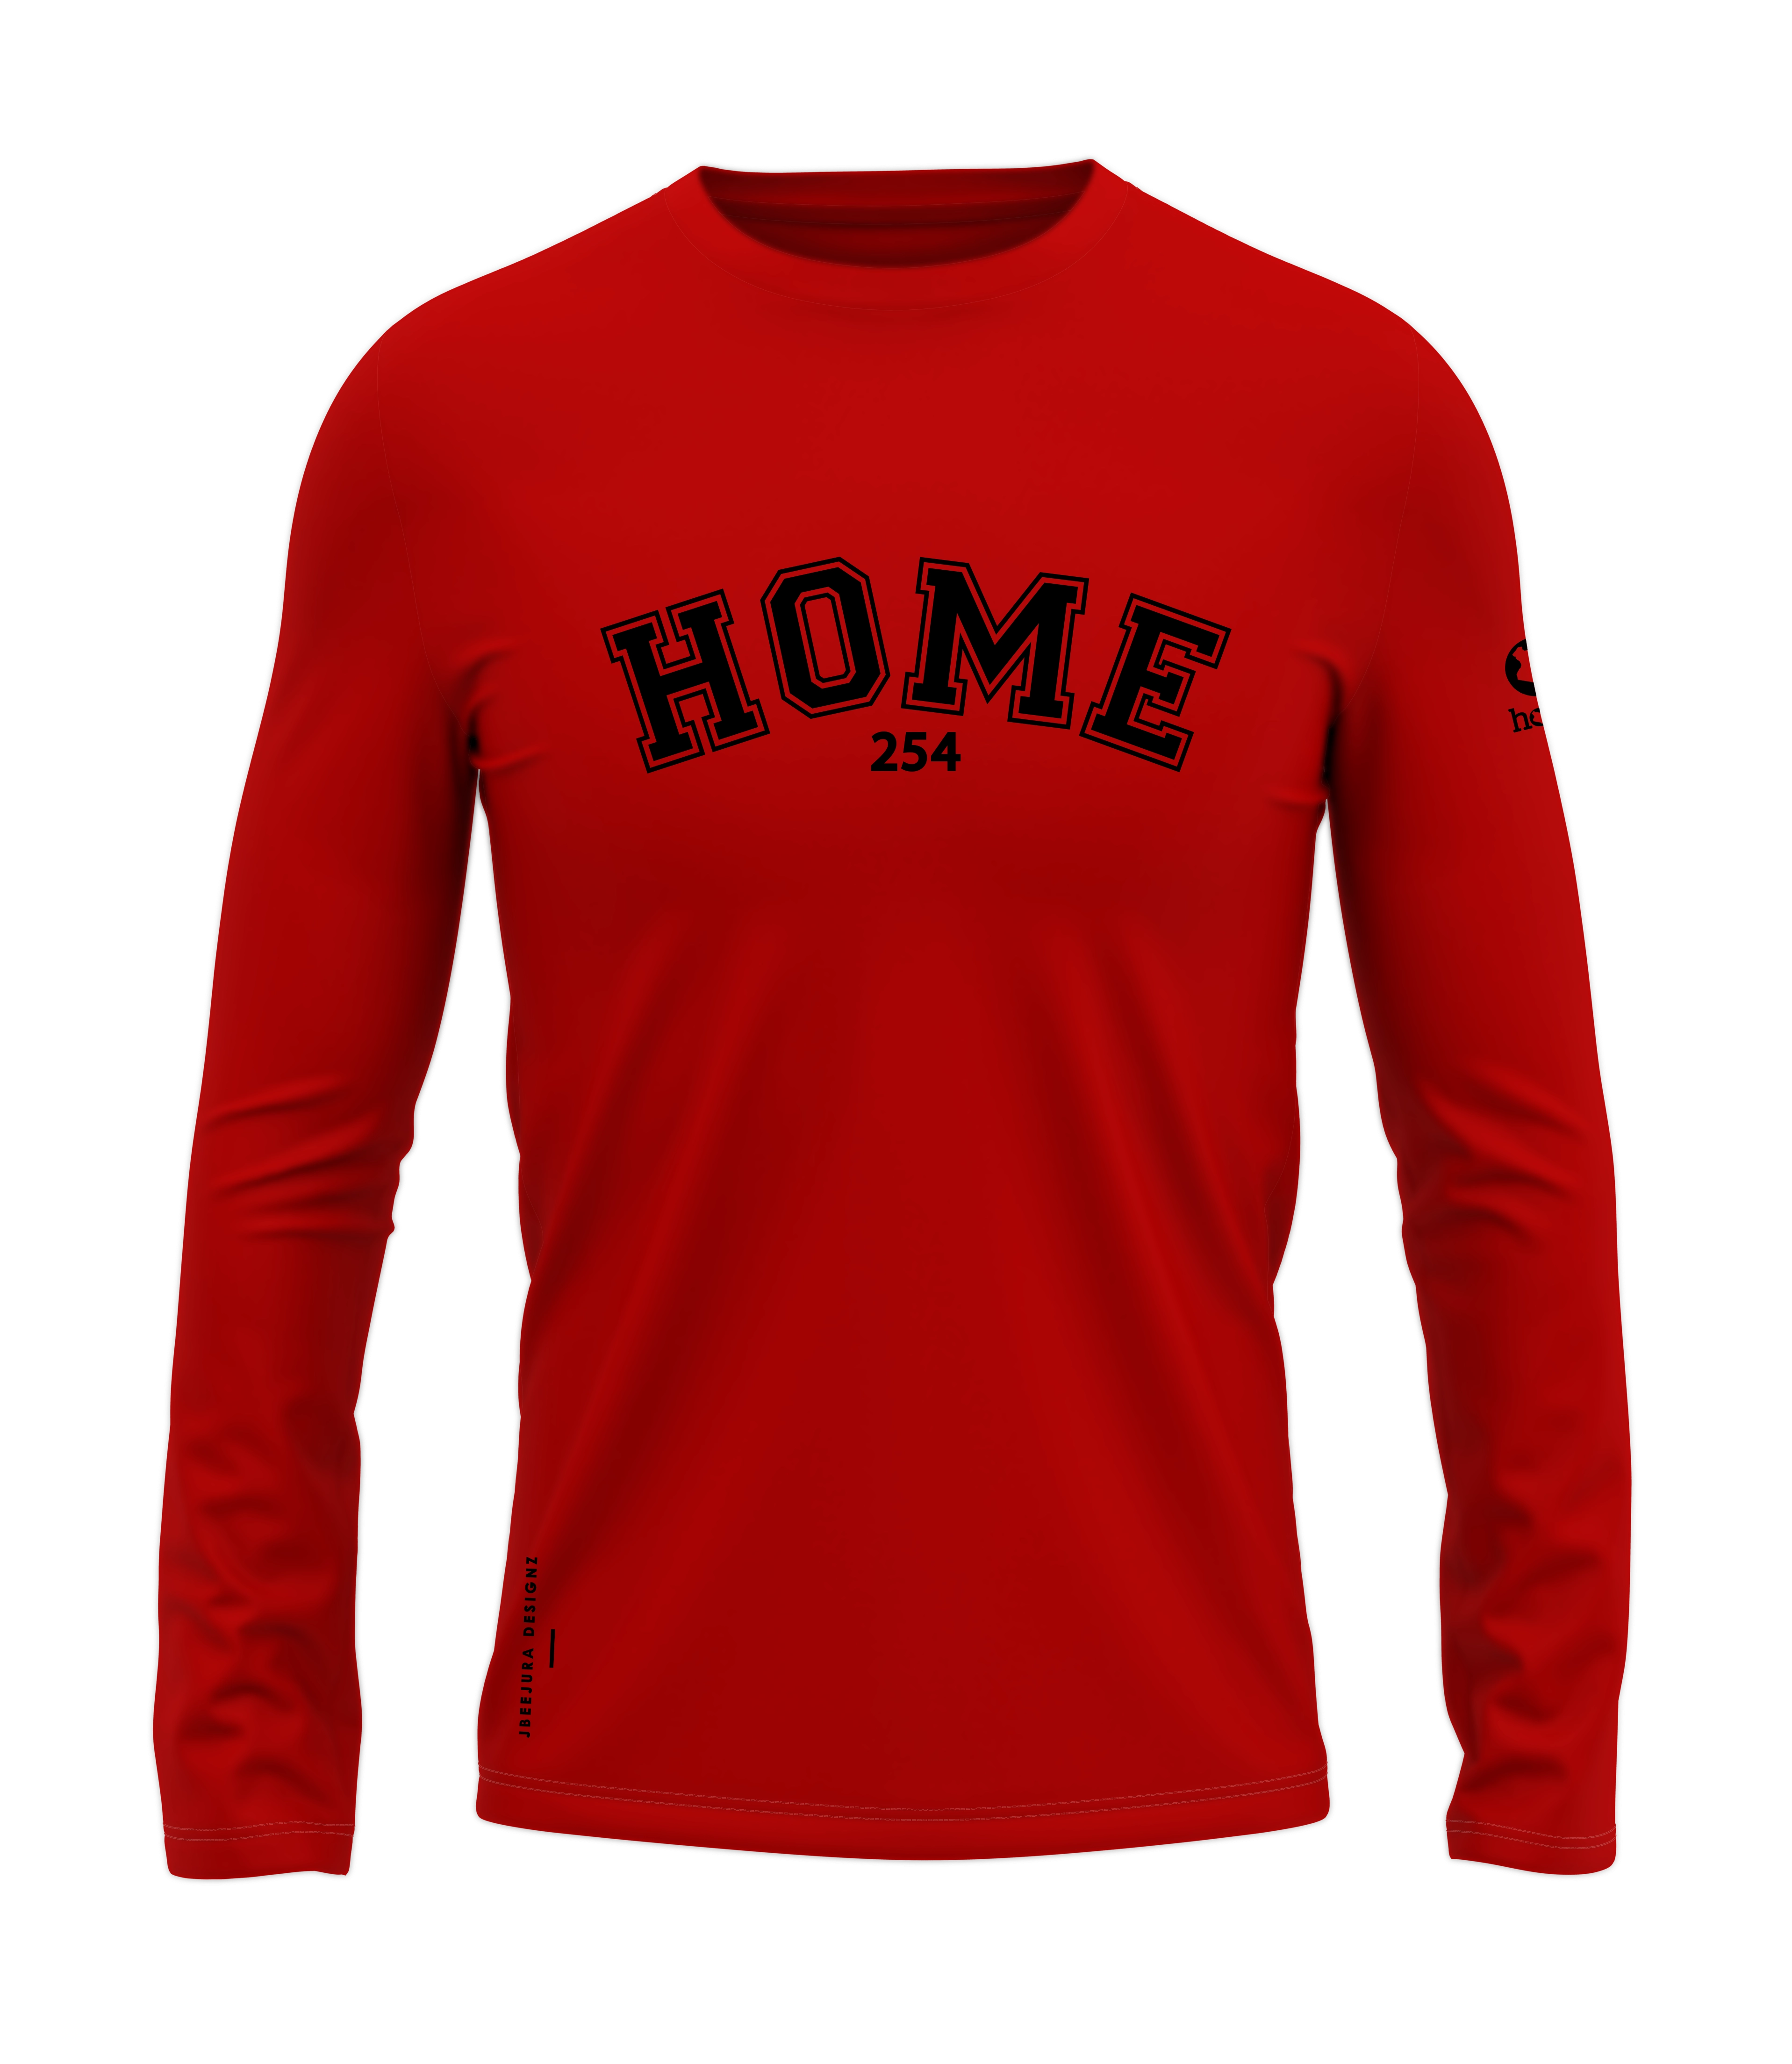 home_254 LONG-SLEEVED RED T-SHIRT WITH A BLACK COLLEGE PRINT – COTTON PLUS FABRIC